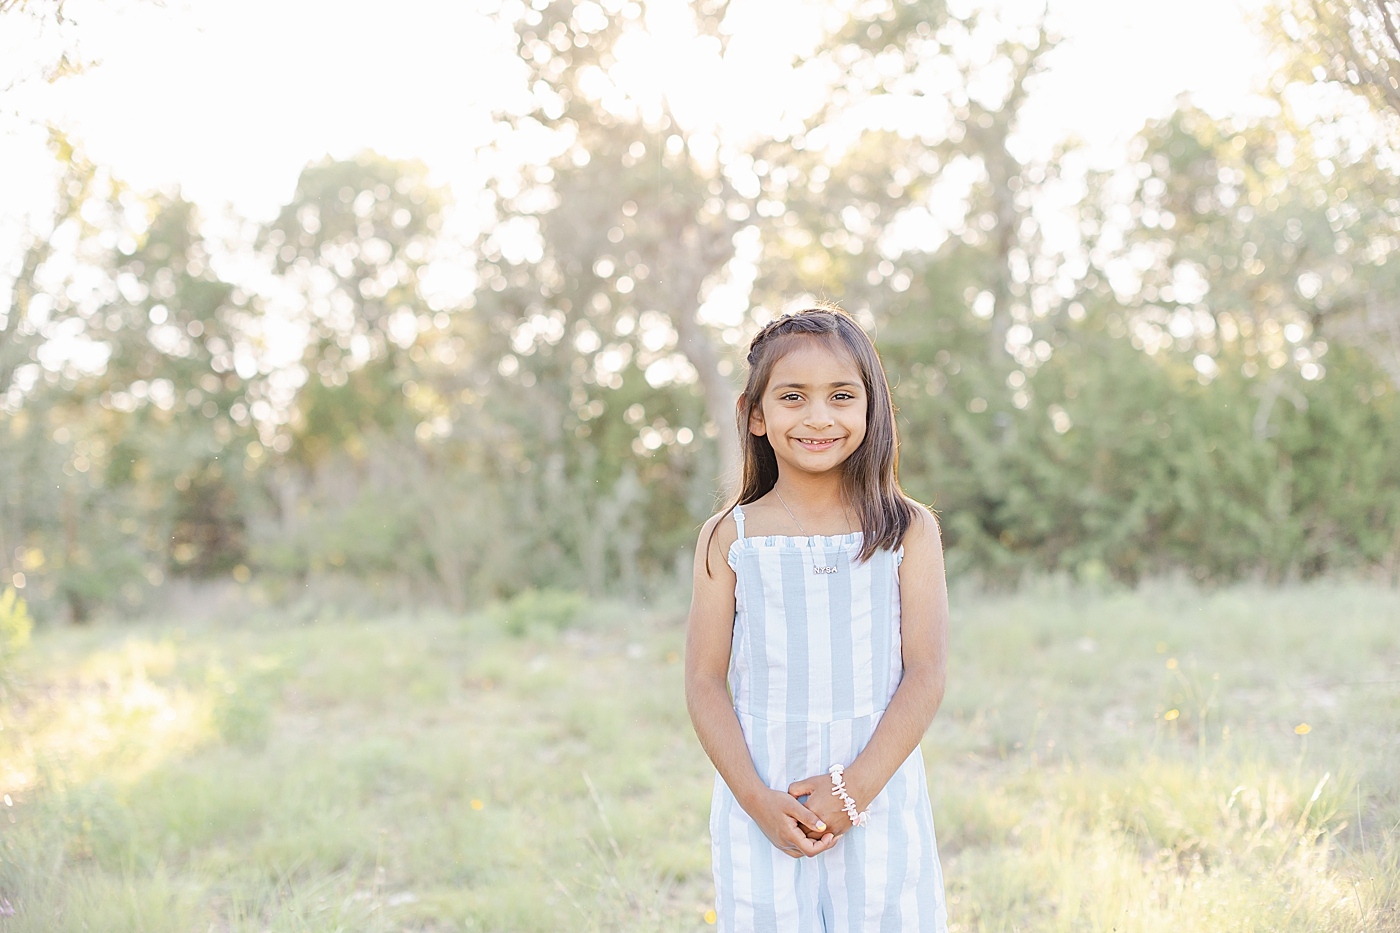 Little girl in a striped dress smiling | Photo by Sana Ahmed Photography